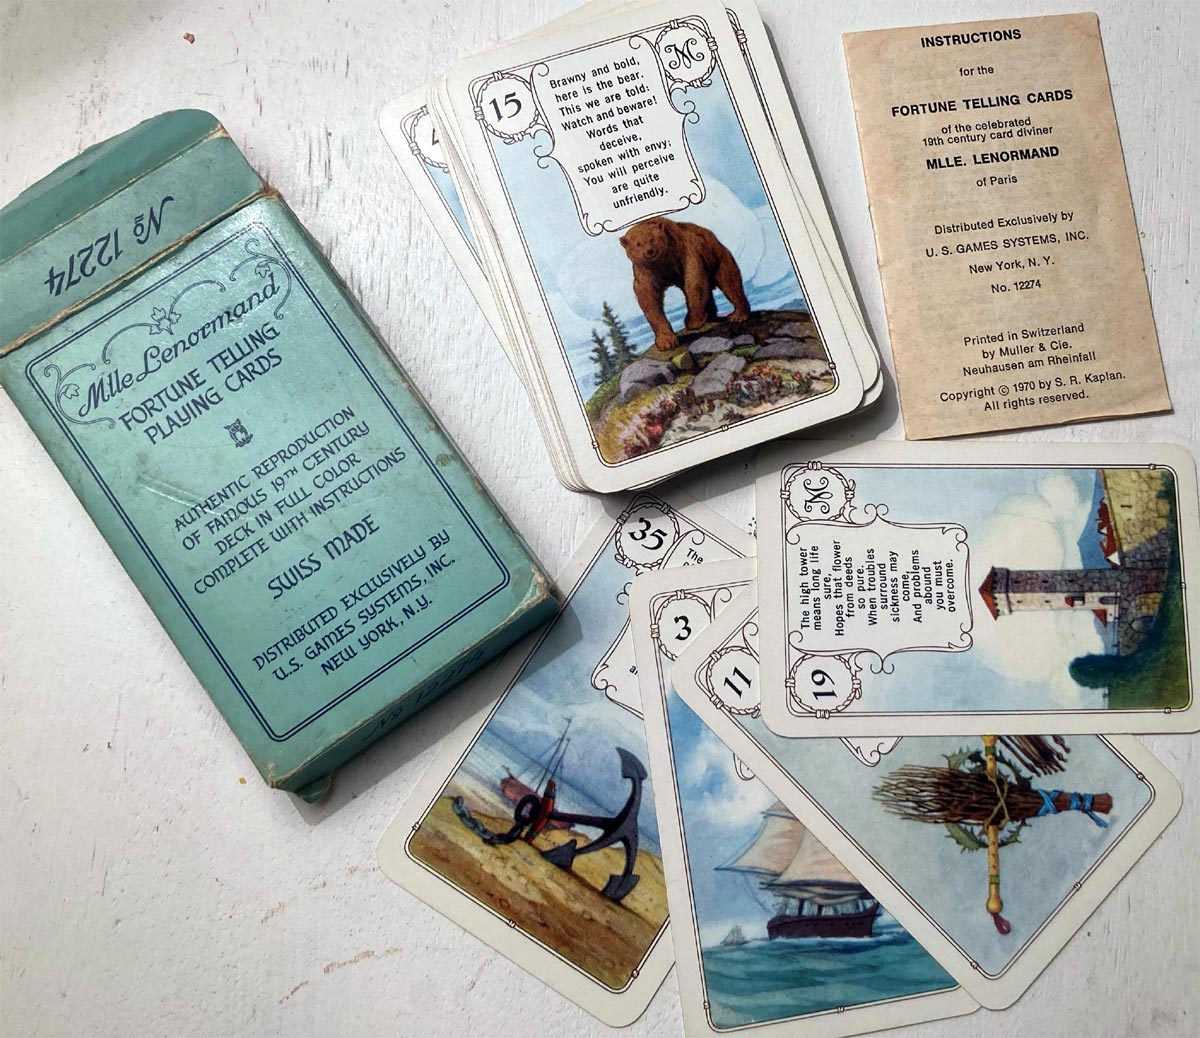 Madame Lenormand Fortune Telling Cards made by Müller & Cie, 1970